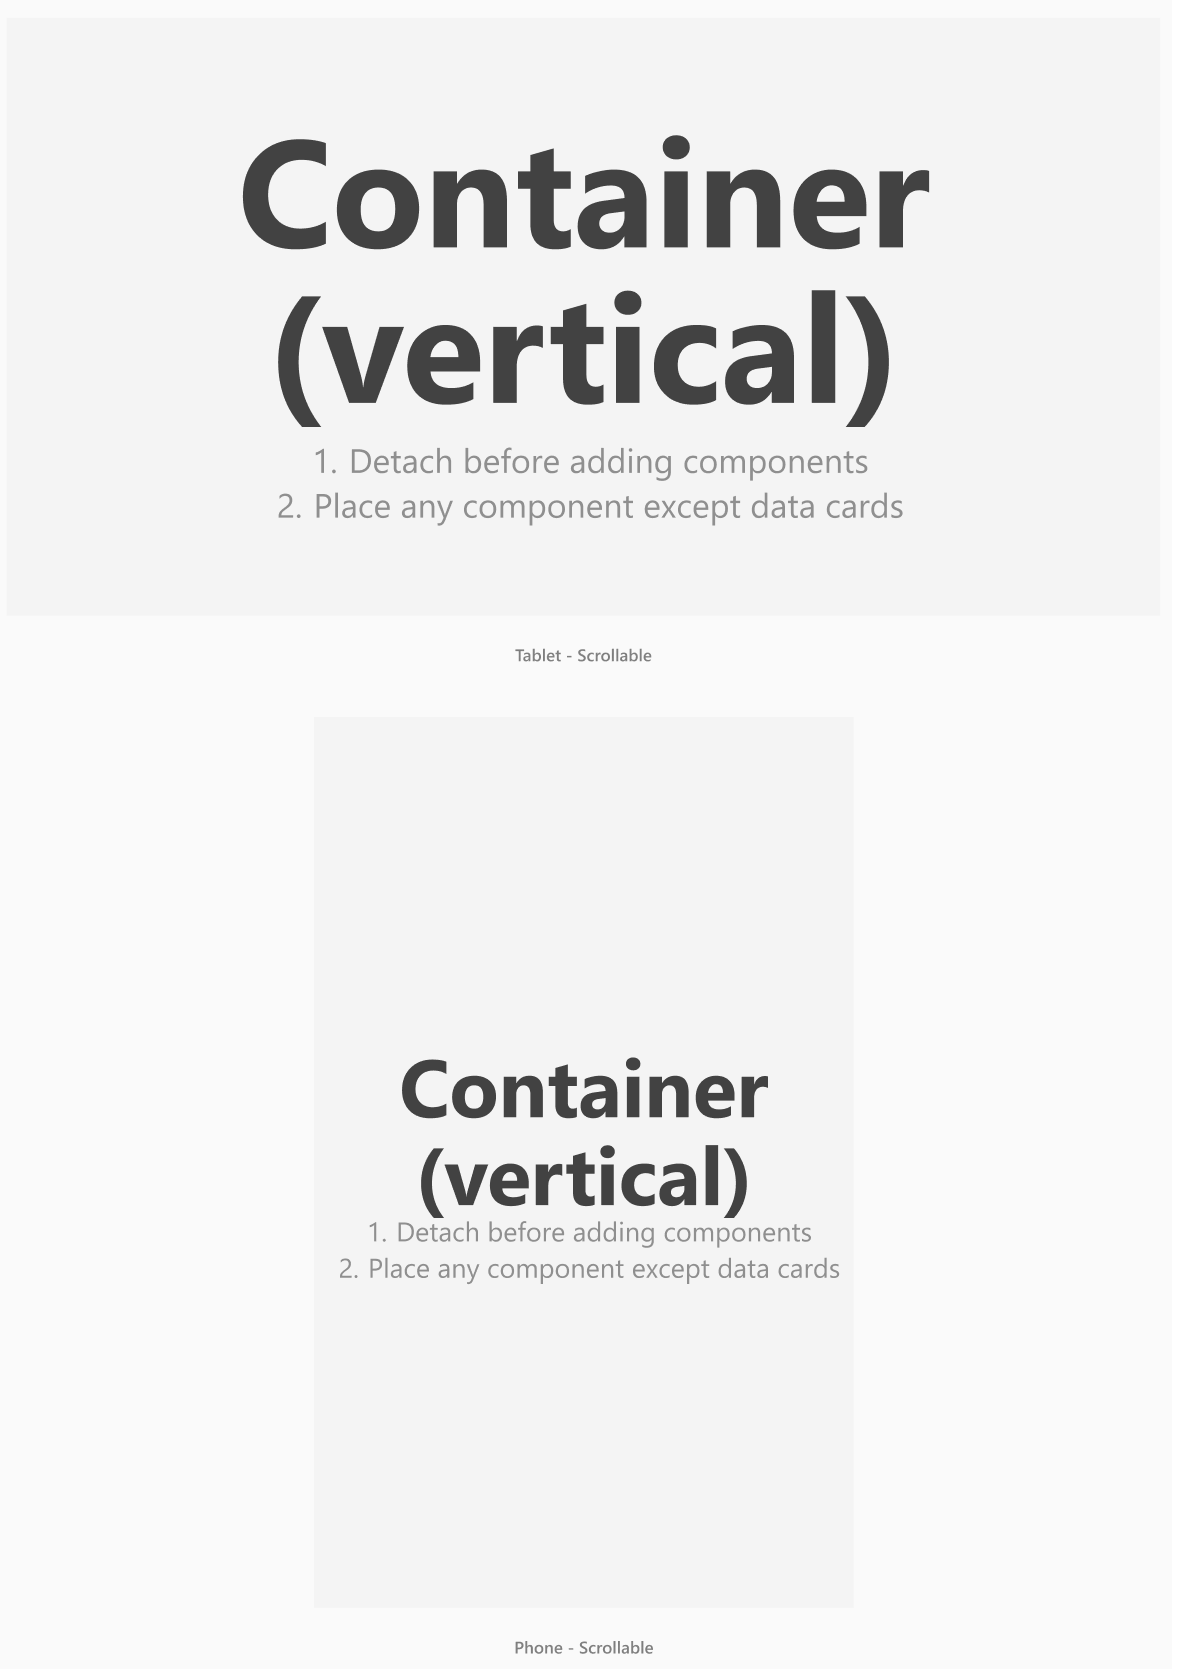 Vertical container in the tablet and phone layout formats.